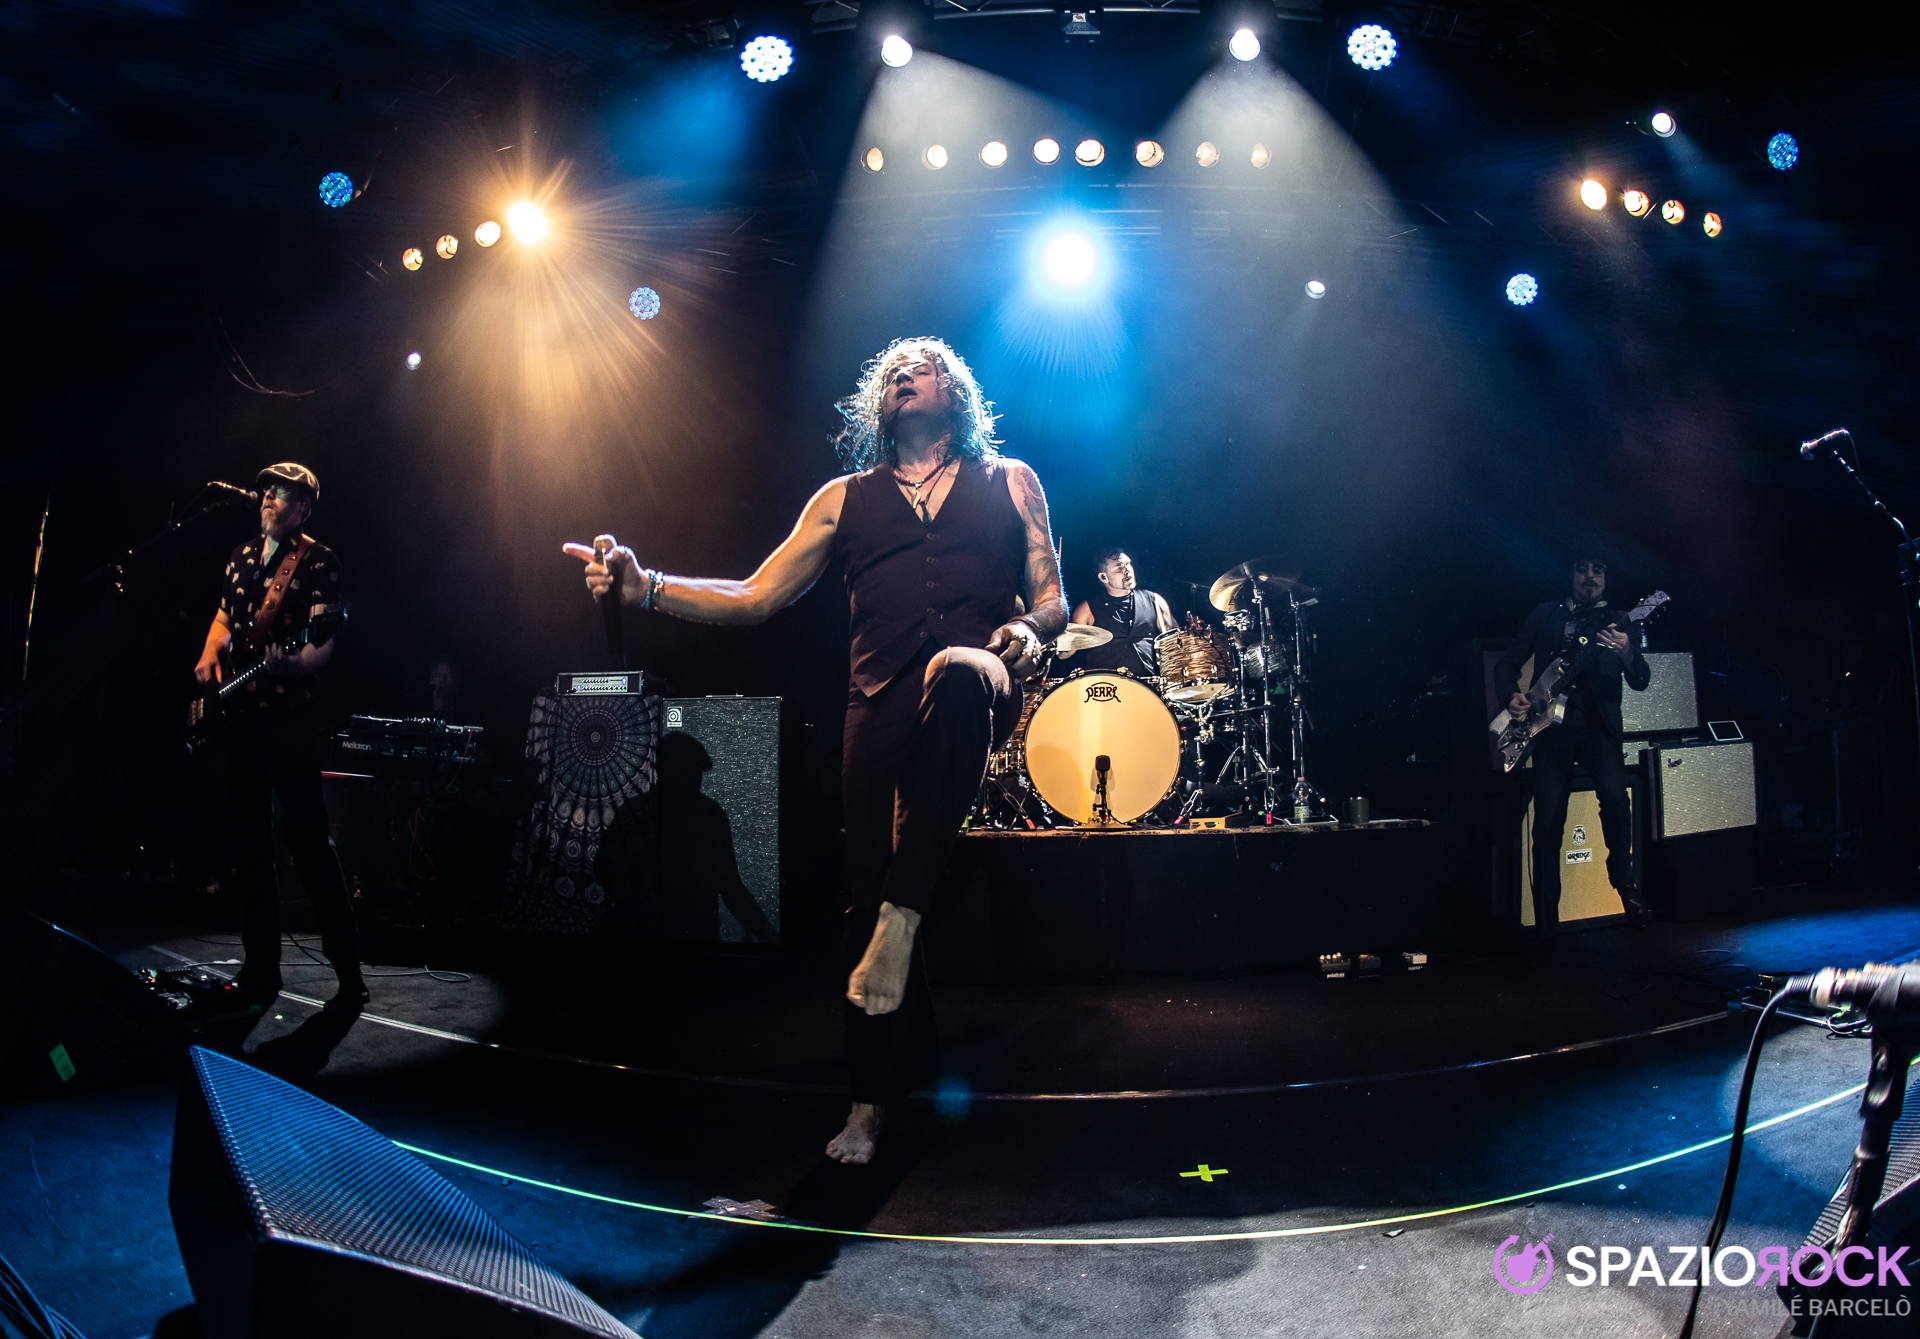 rival sons darkfighter tour